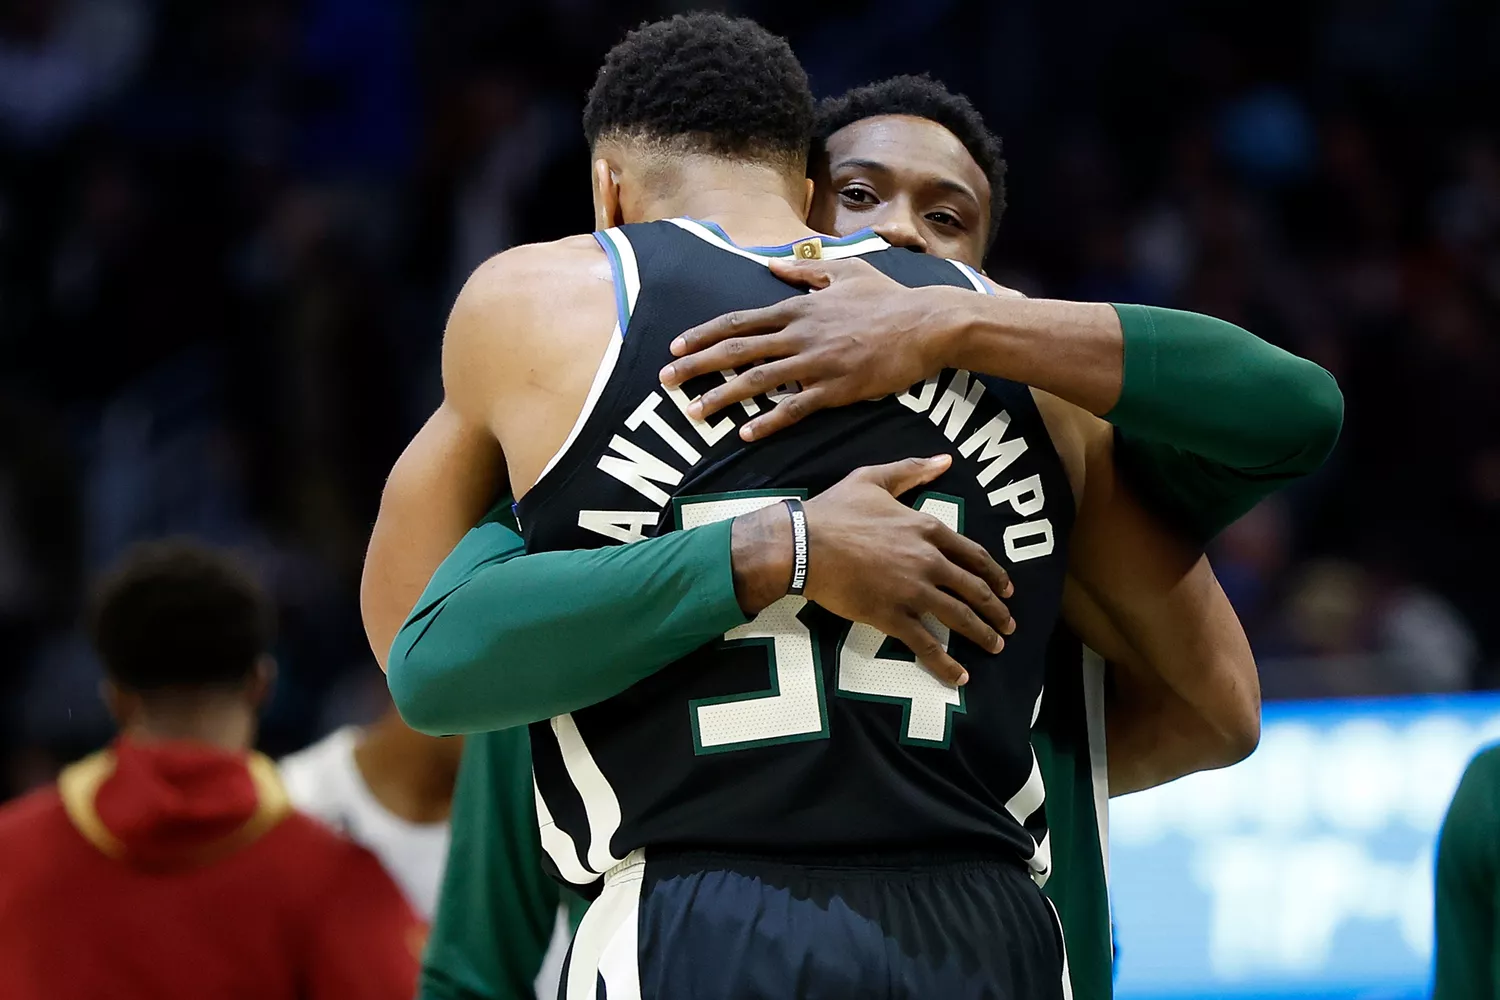 Giannis Antetokounmpo #34 of the Milwaukee Bucks hugs his brother Thanasis Antetokounmpo #43 of the Milwaukee Bucks before the start of game against the Cleveland Cavaliers at Fiserv Forum on November 25, 2022 in Milwaukee, Wisconsin.